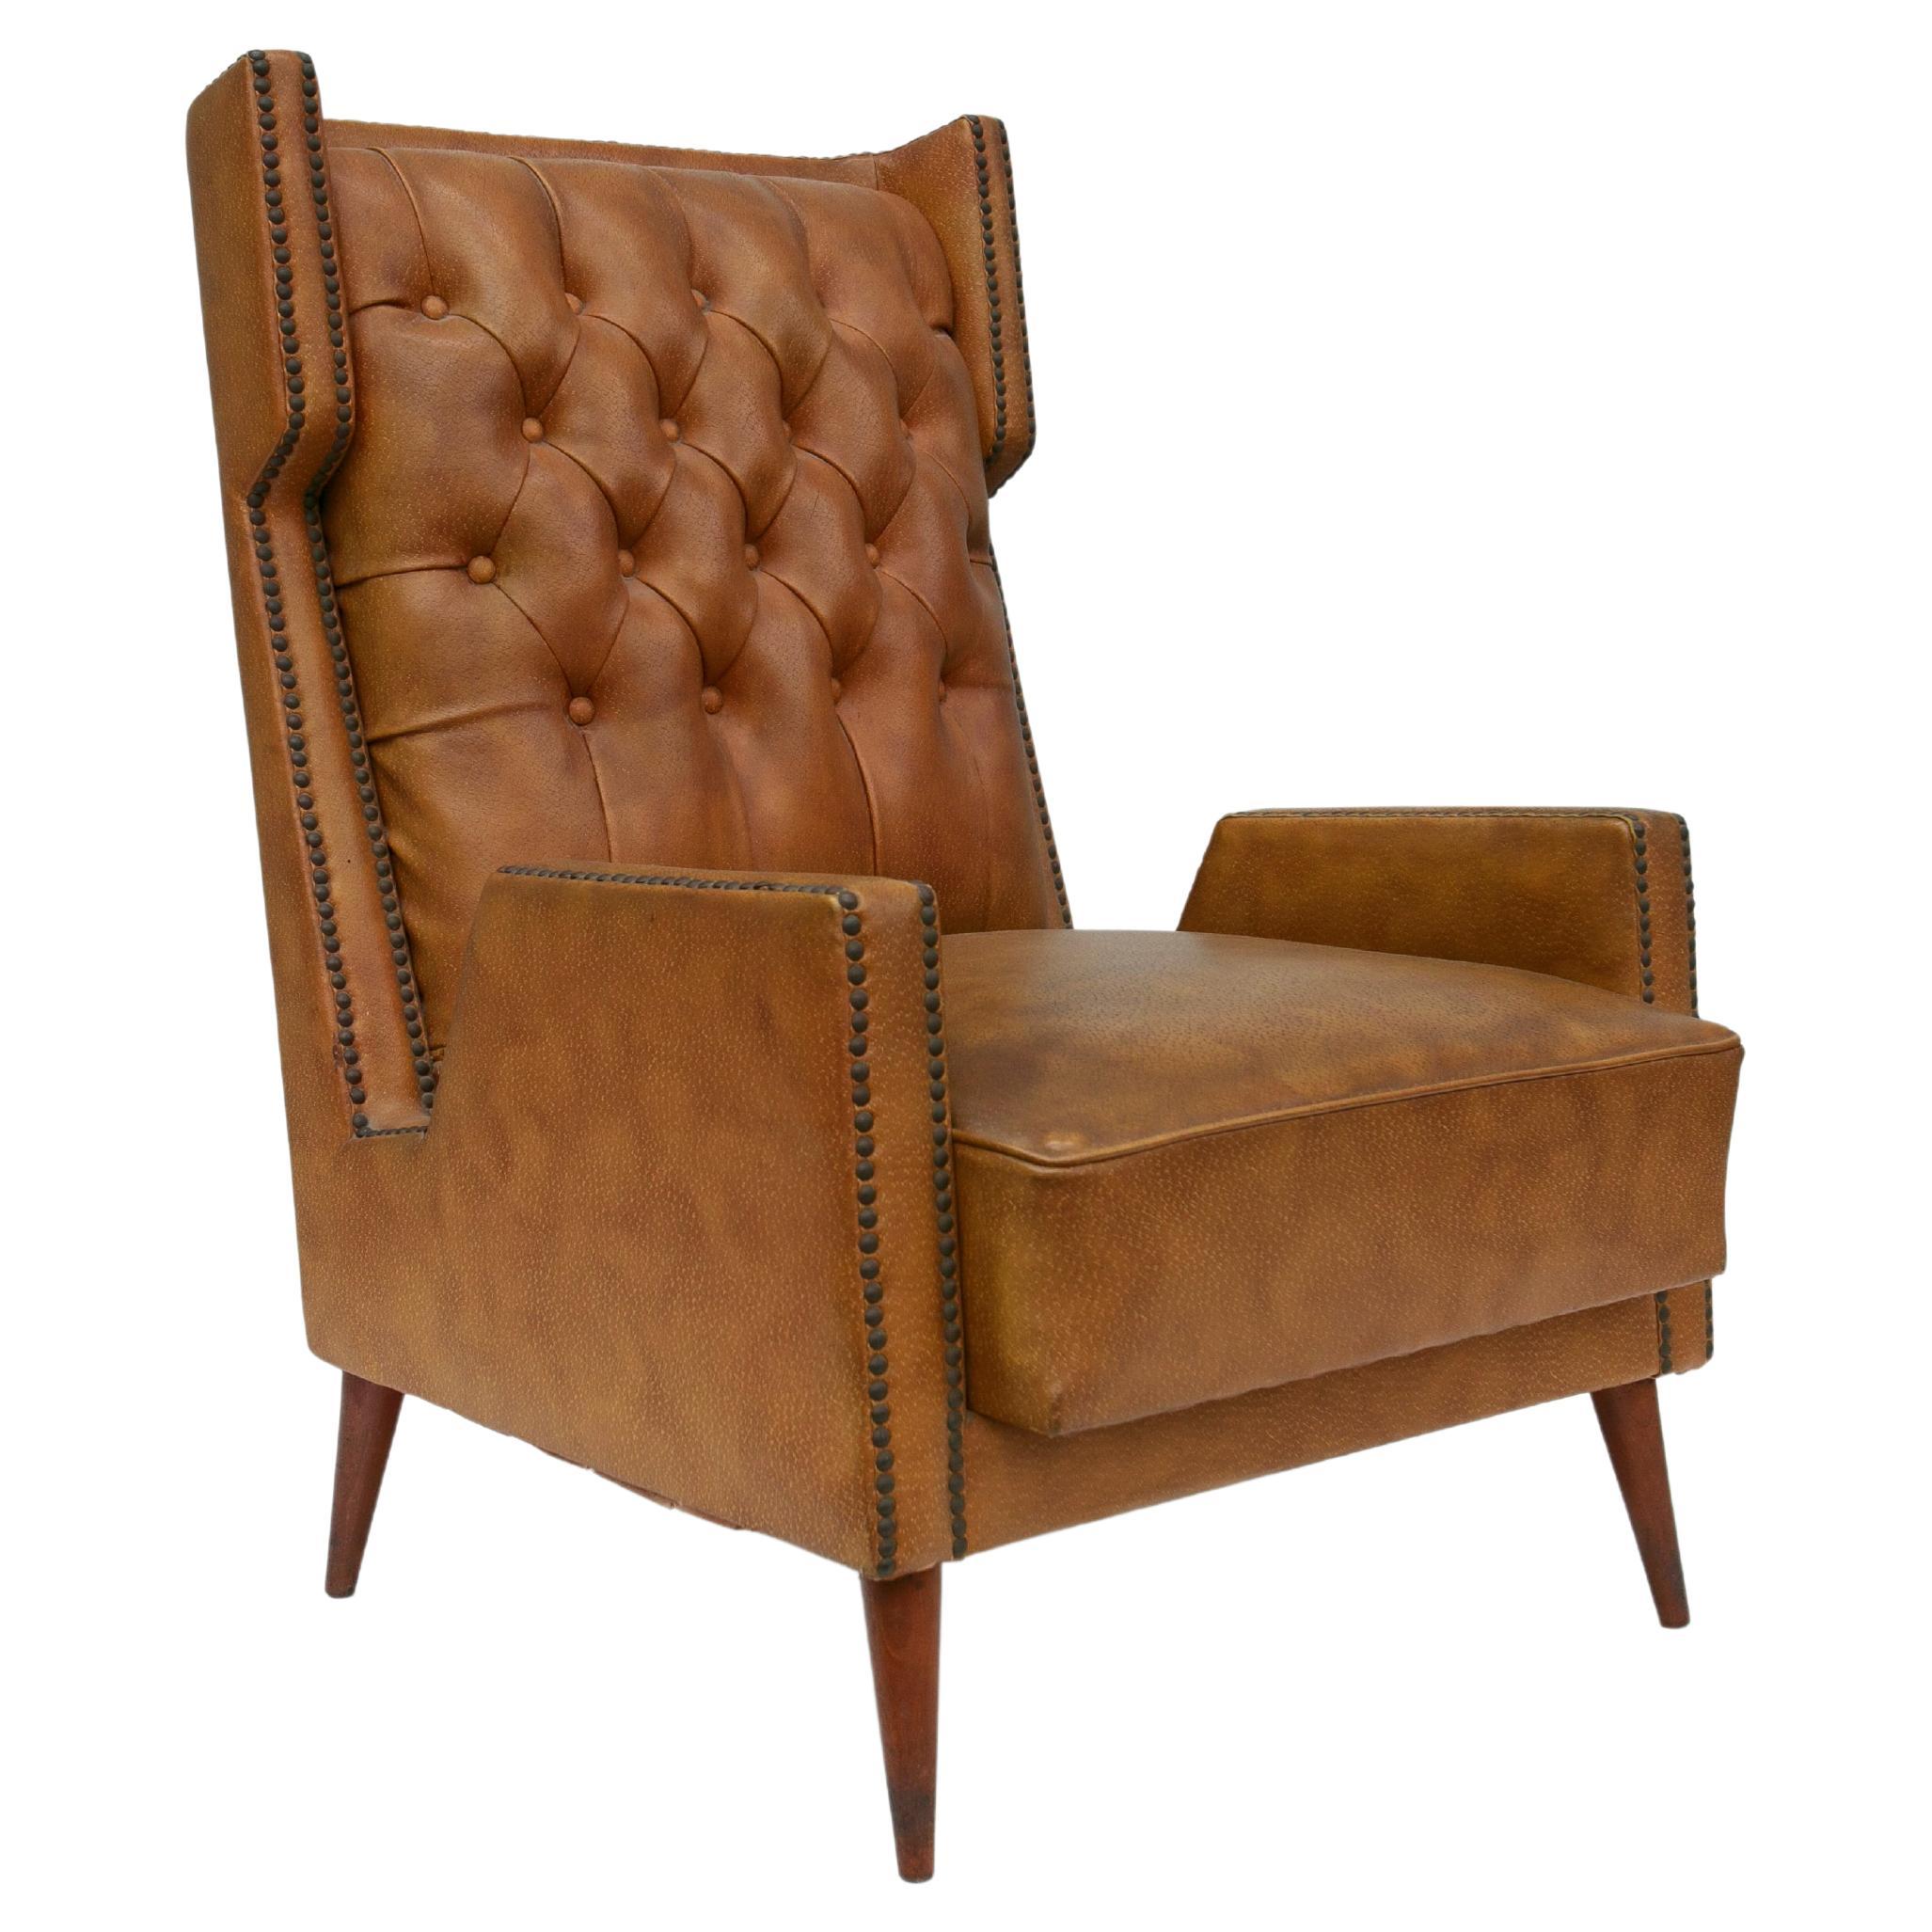 Available today, this Mid-Century Modern armchair in hardwood and brown faux leather by Giuseppe Scapinelli, 1950s Brazil is nothing less than the FIND of the year!

The armchair is in its original form and is in an excellent state. This beauty